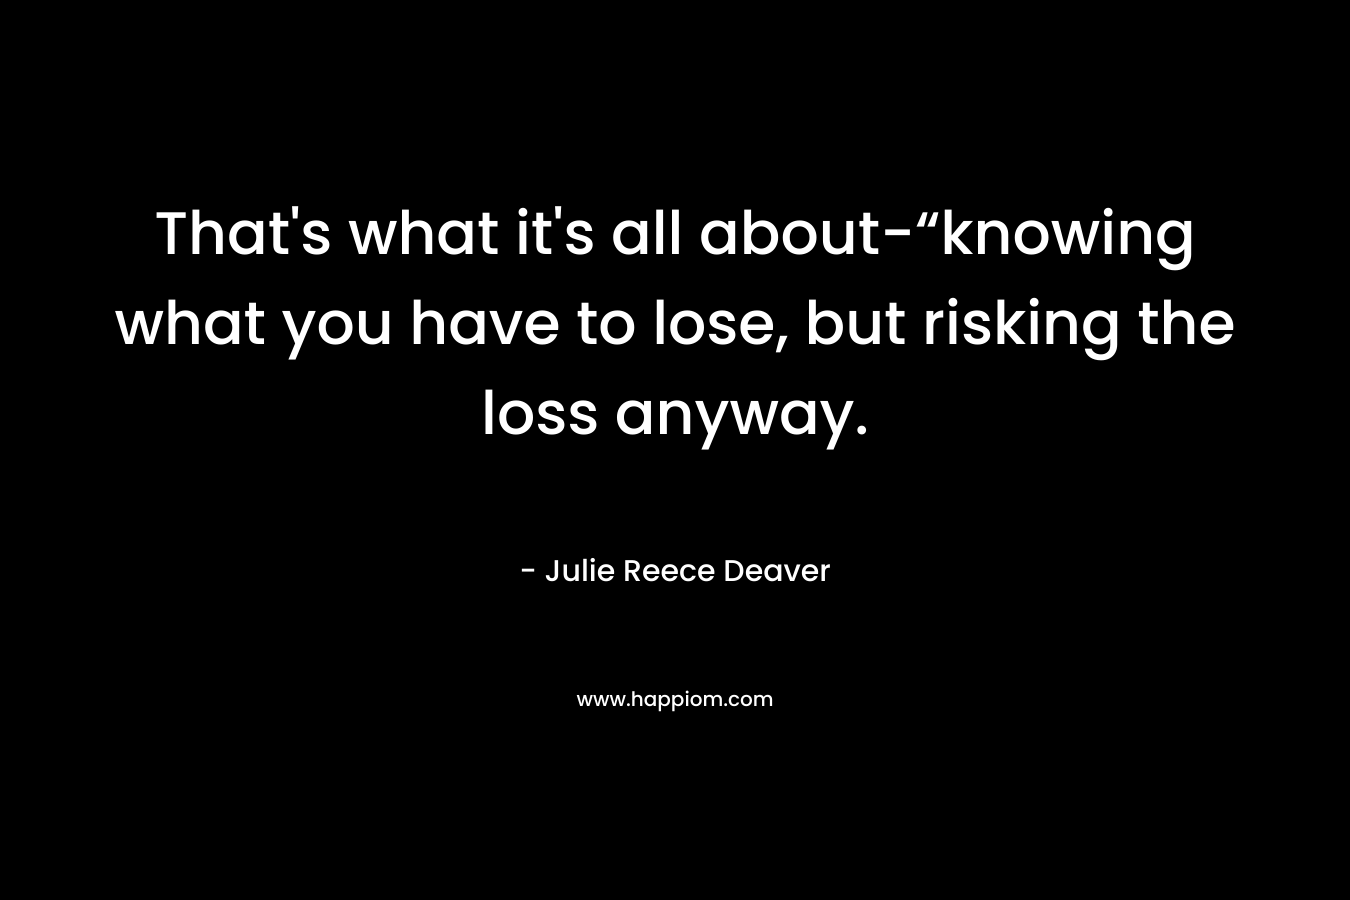 That’s what it’s all about-“knowing what you have to lose, but risking the loss anyway. – Julie Reece Deaver